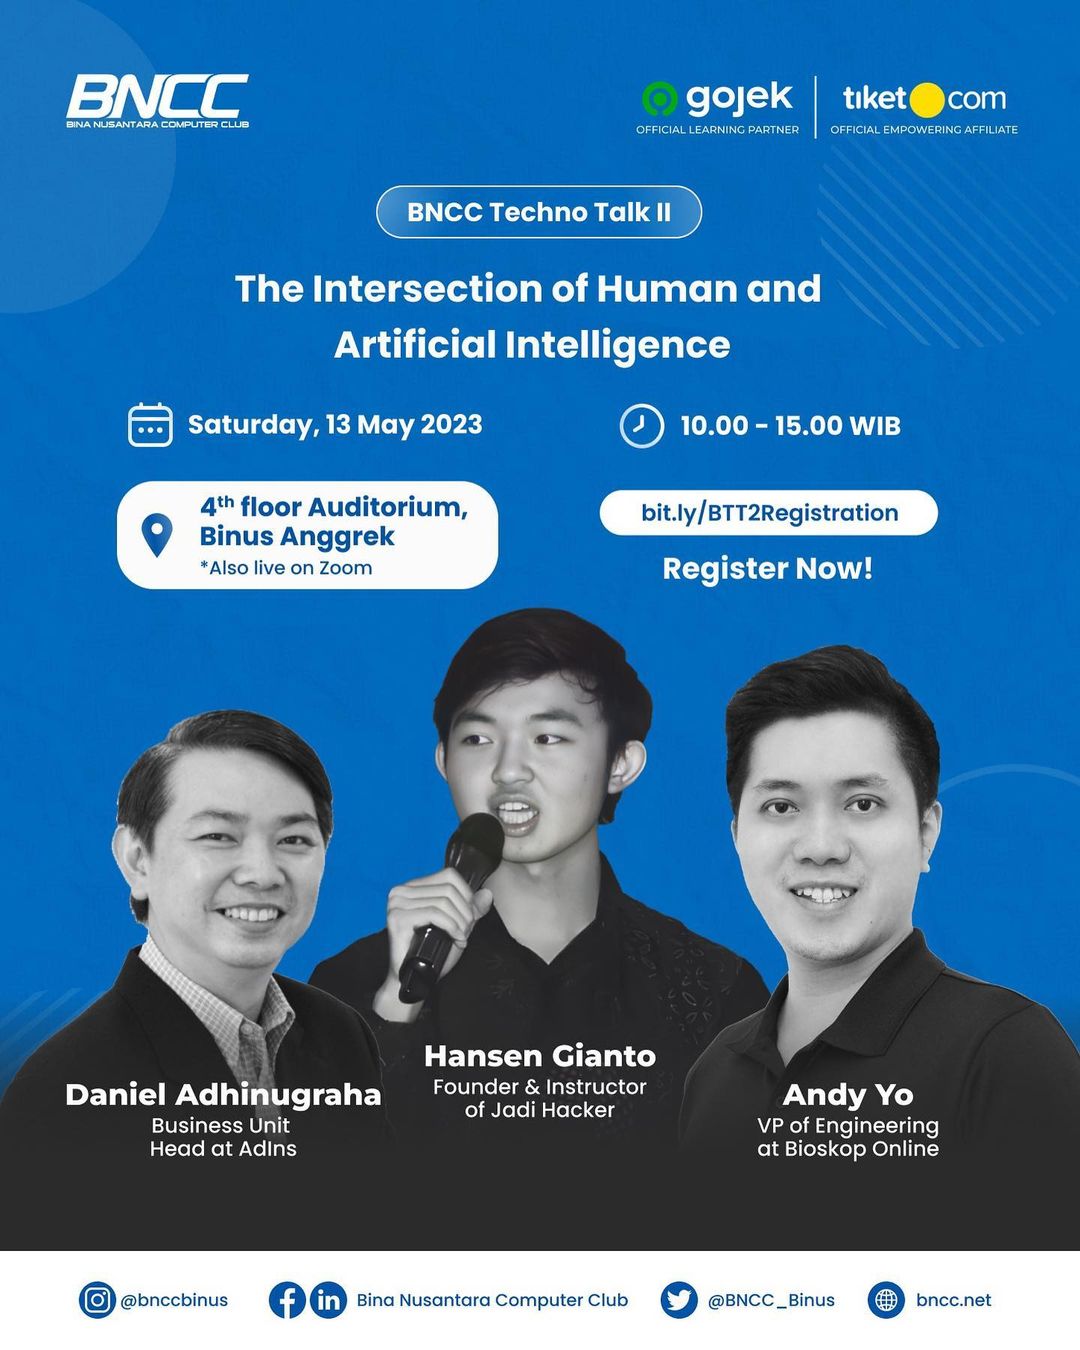 BNCC Techno Talk II: The Intersection of Human and Artificial Intelligence